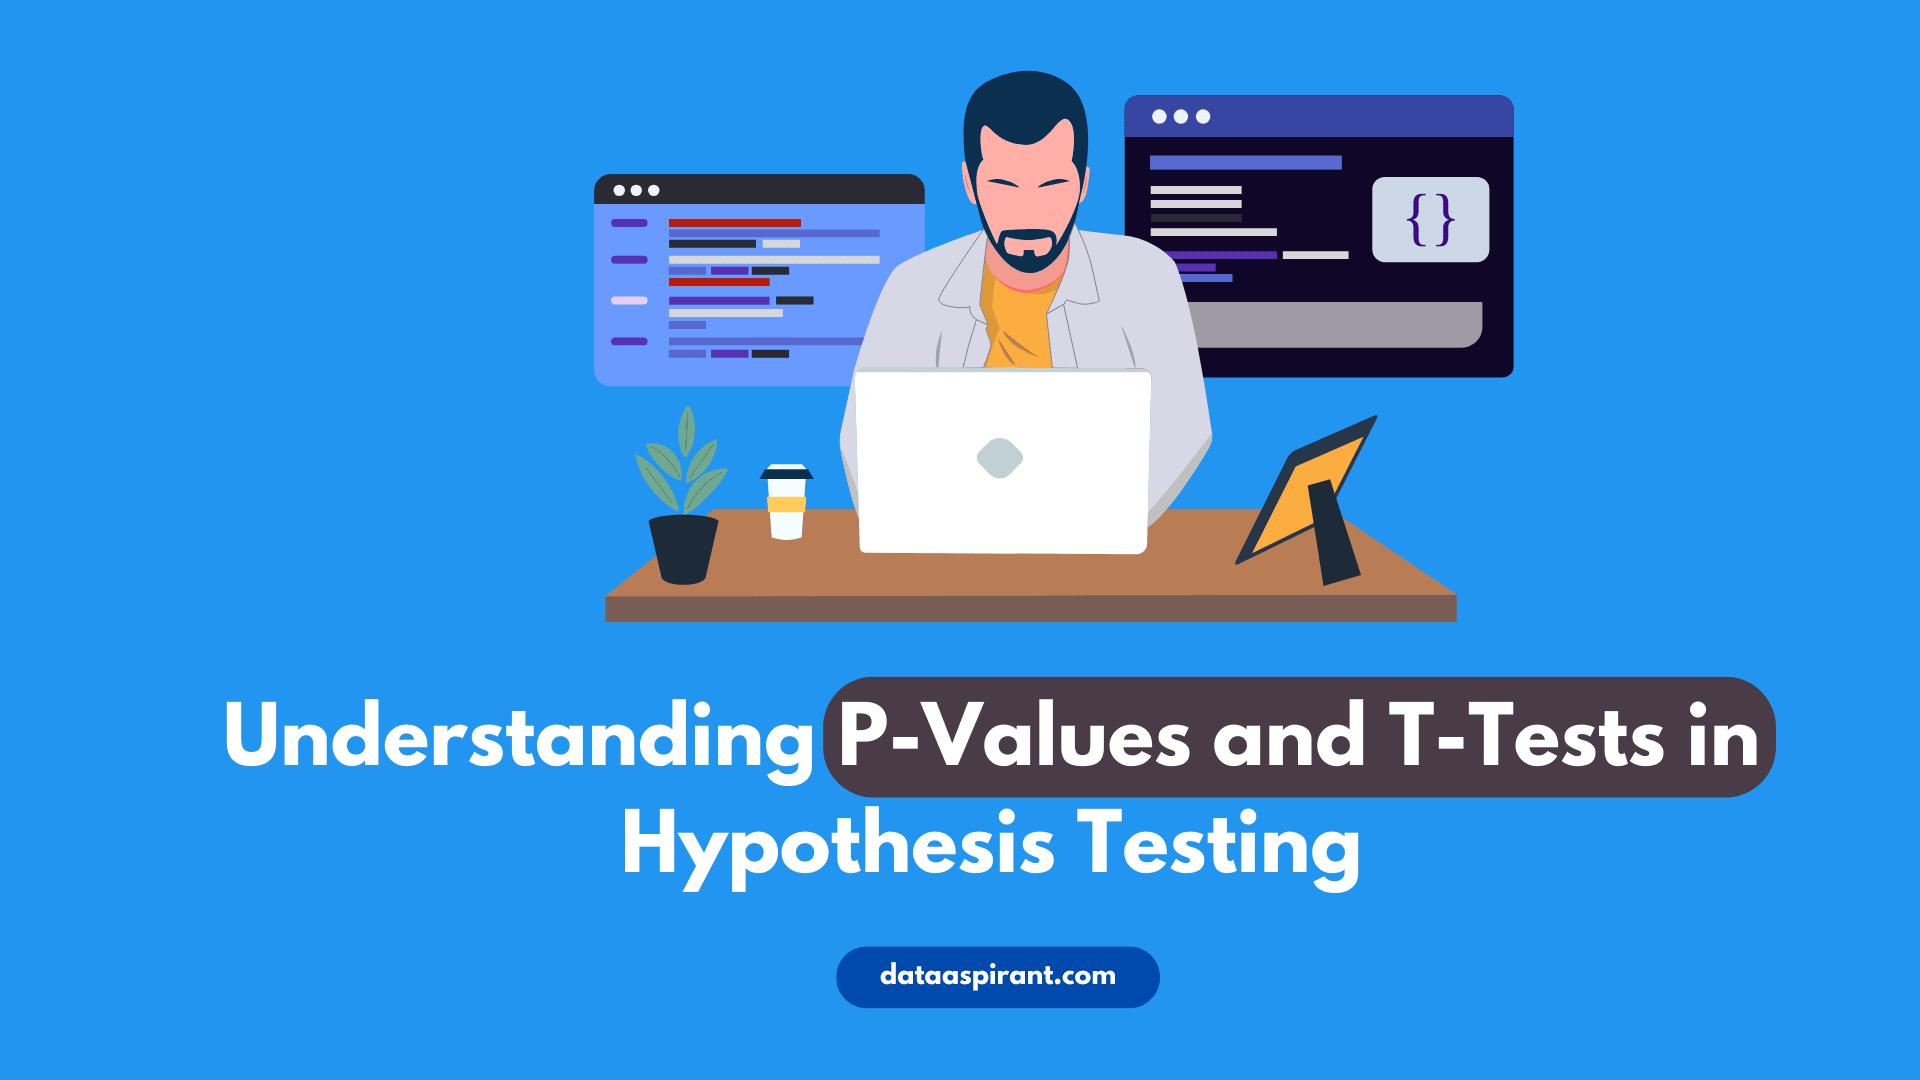 Understanding P-Values and T-Tests in Hypothesis Testing